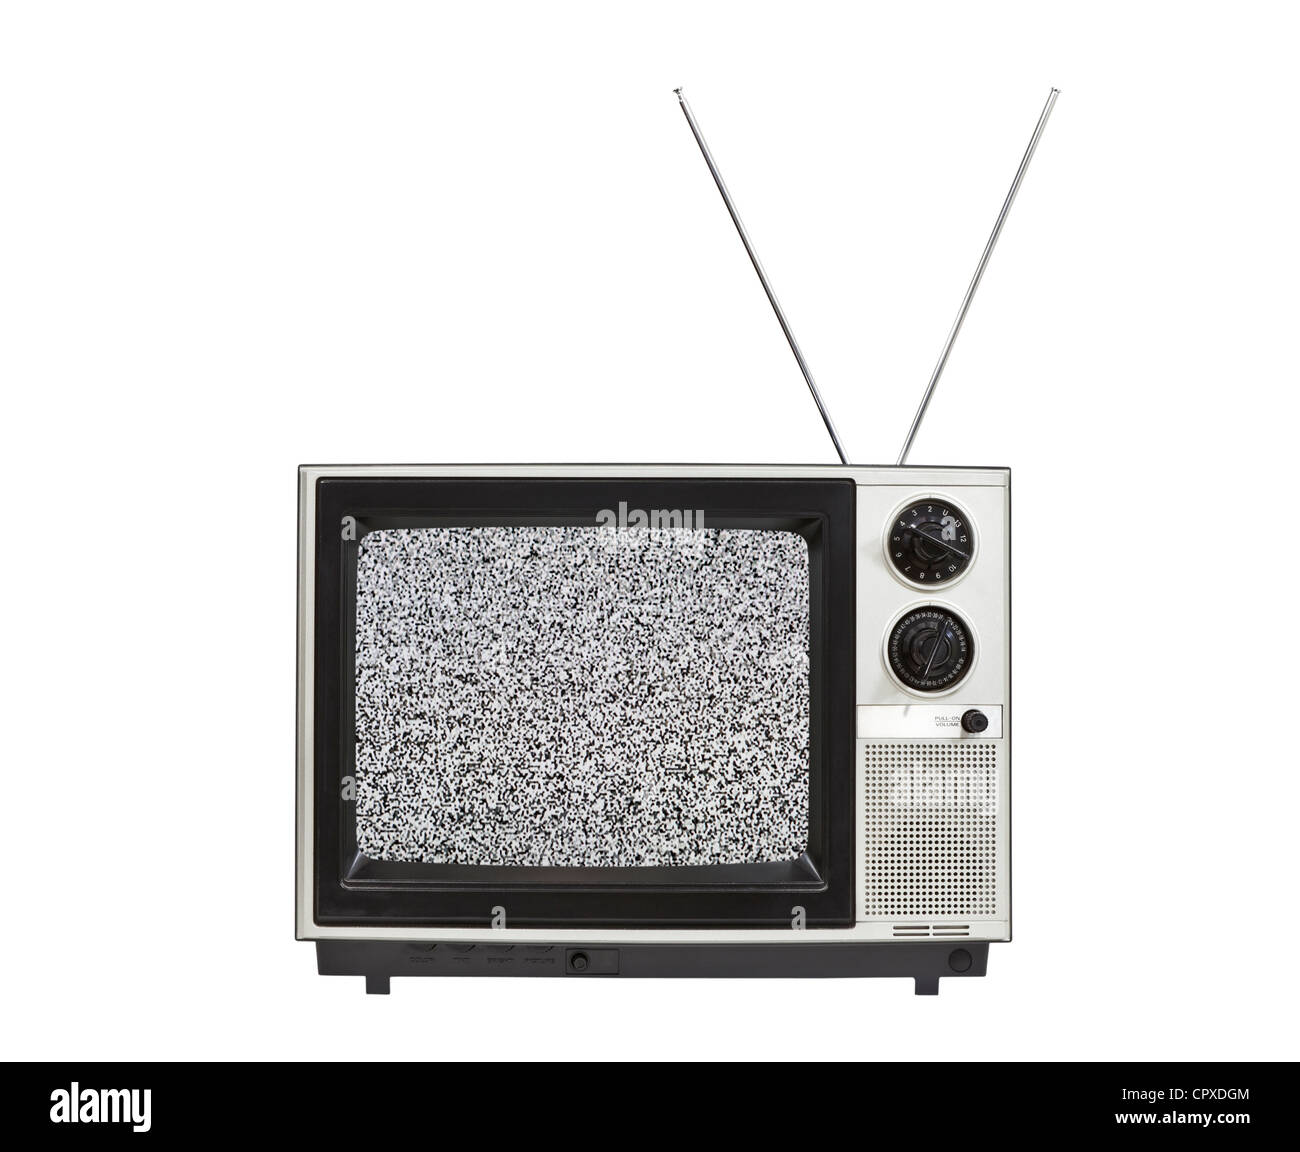 Static screen portable vintage television with antennas up. Isolated on white. Stock Photo